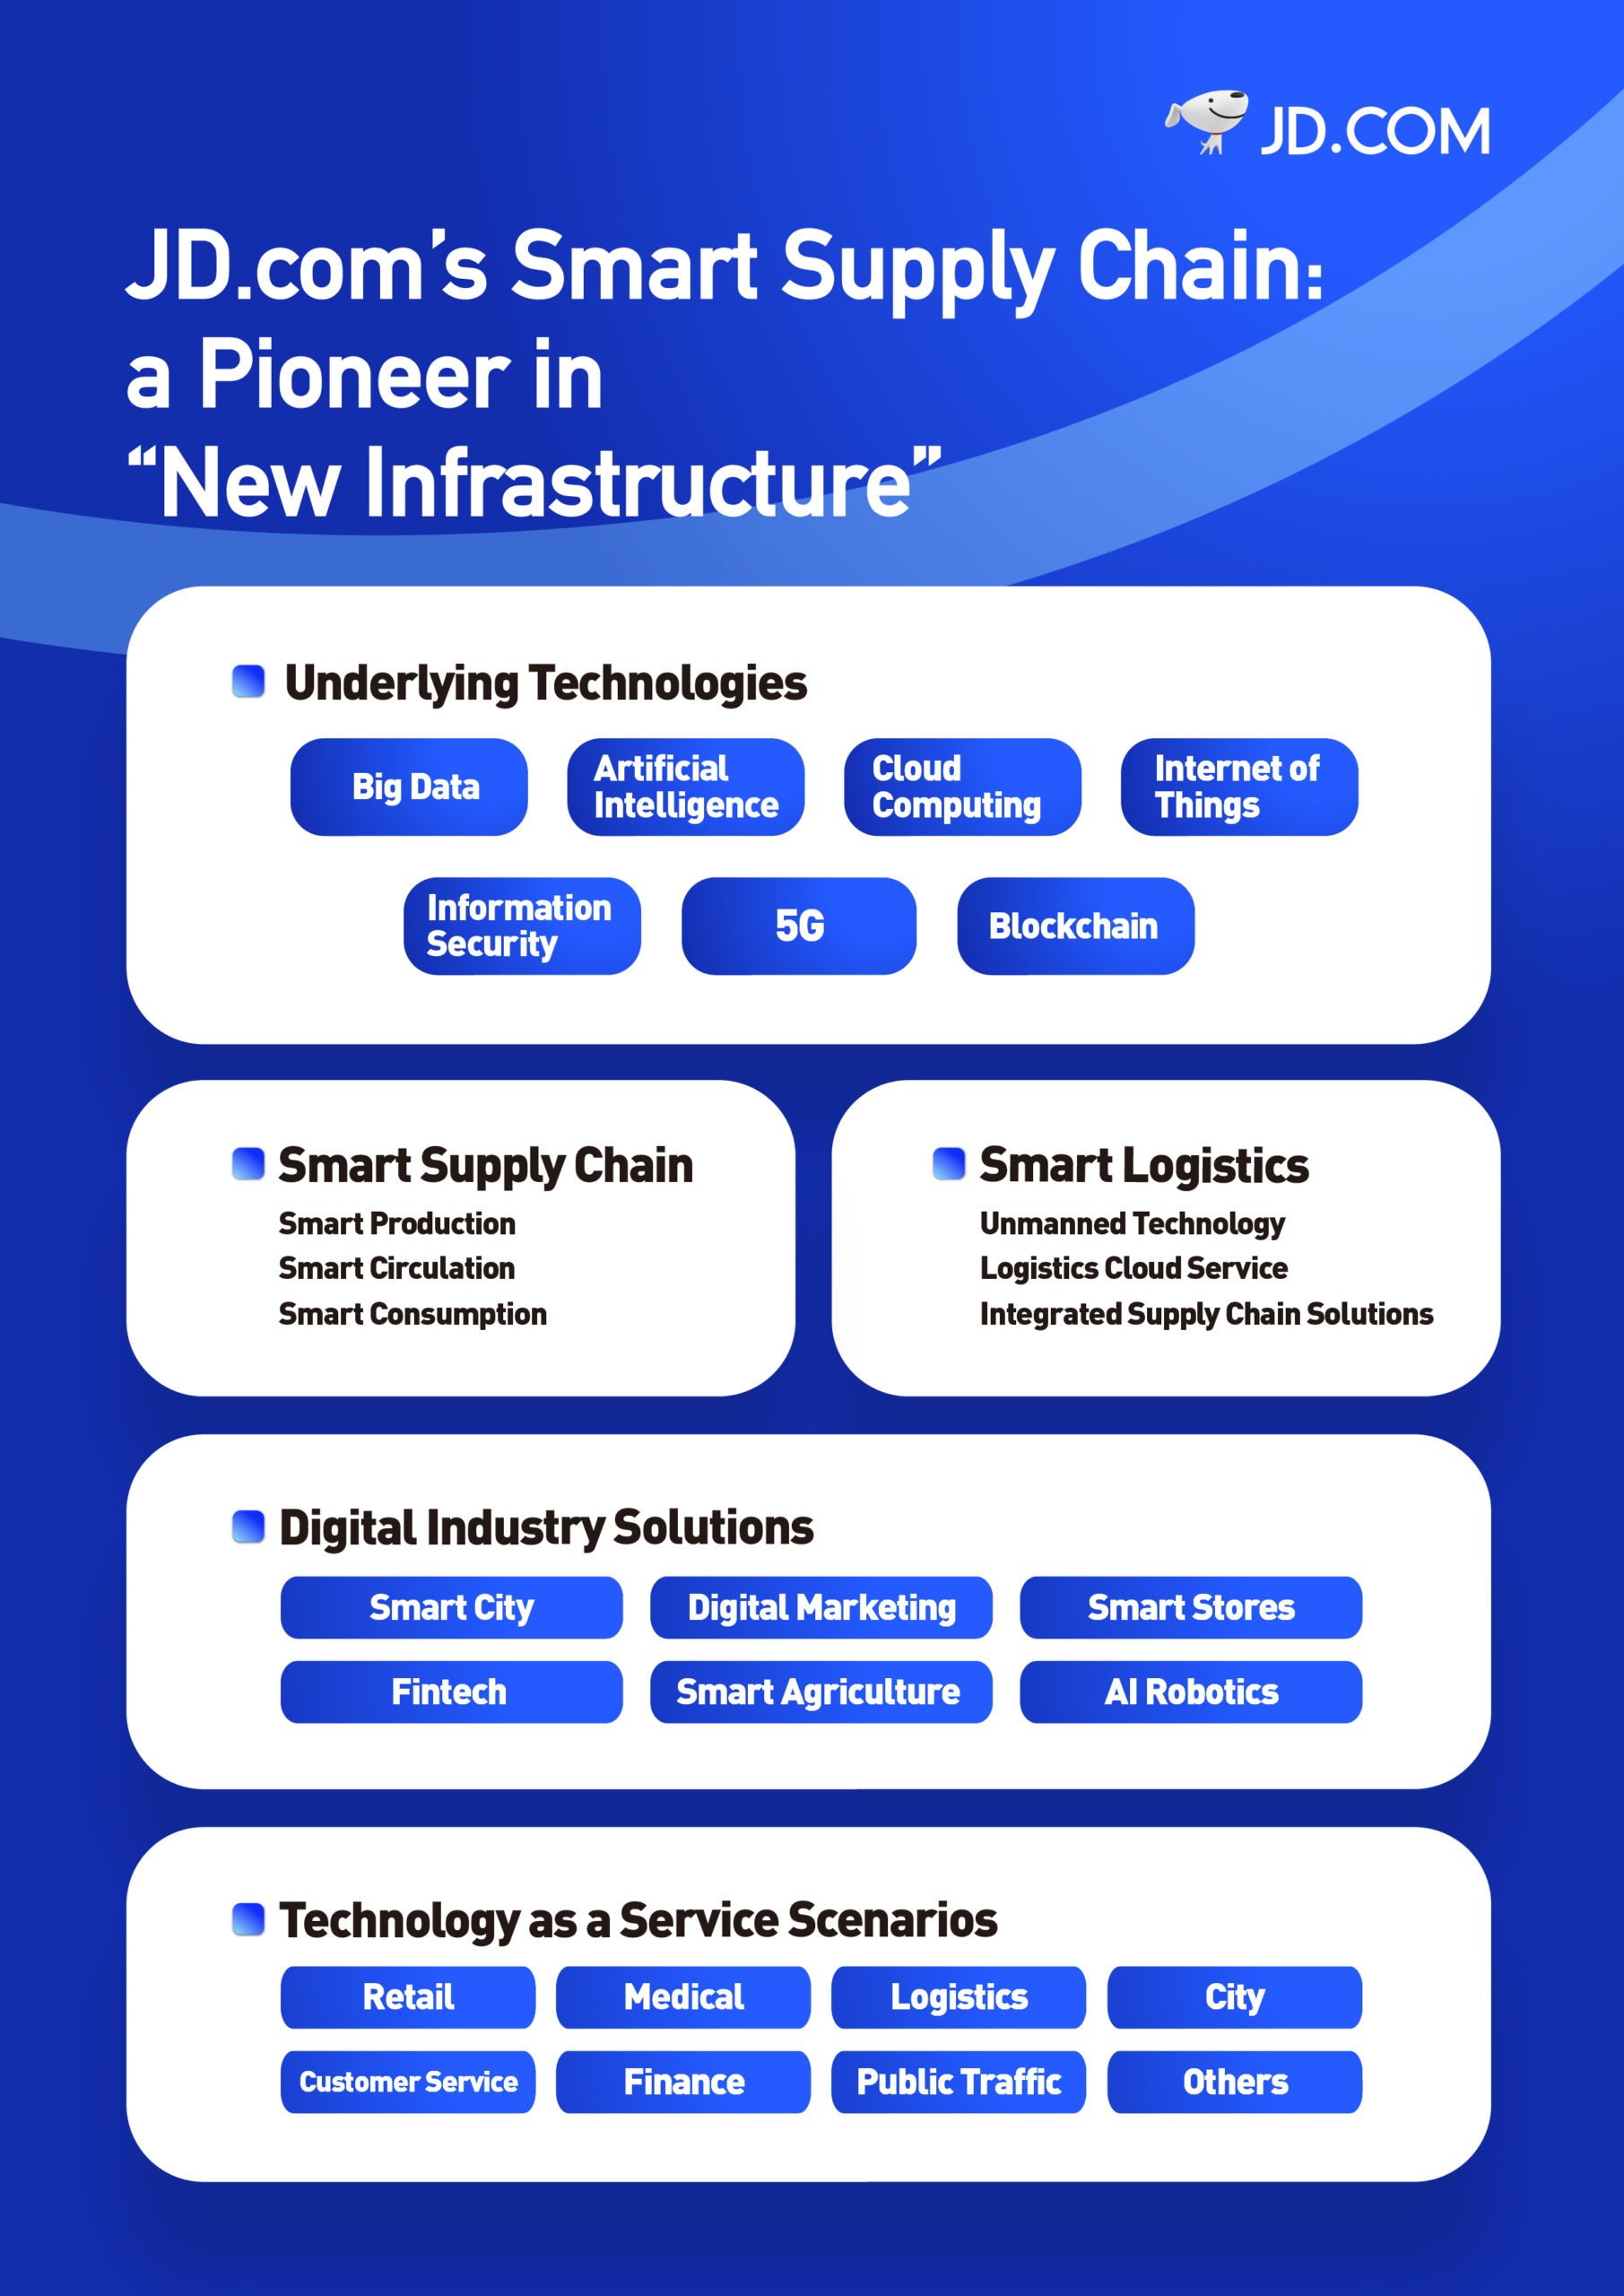 To get a sense of JD’s smart supply chain capabilities, take a look at the graphic